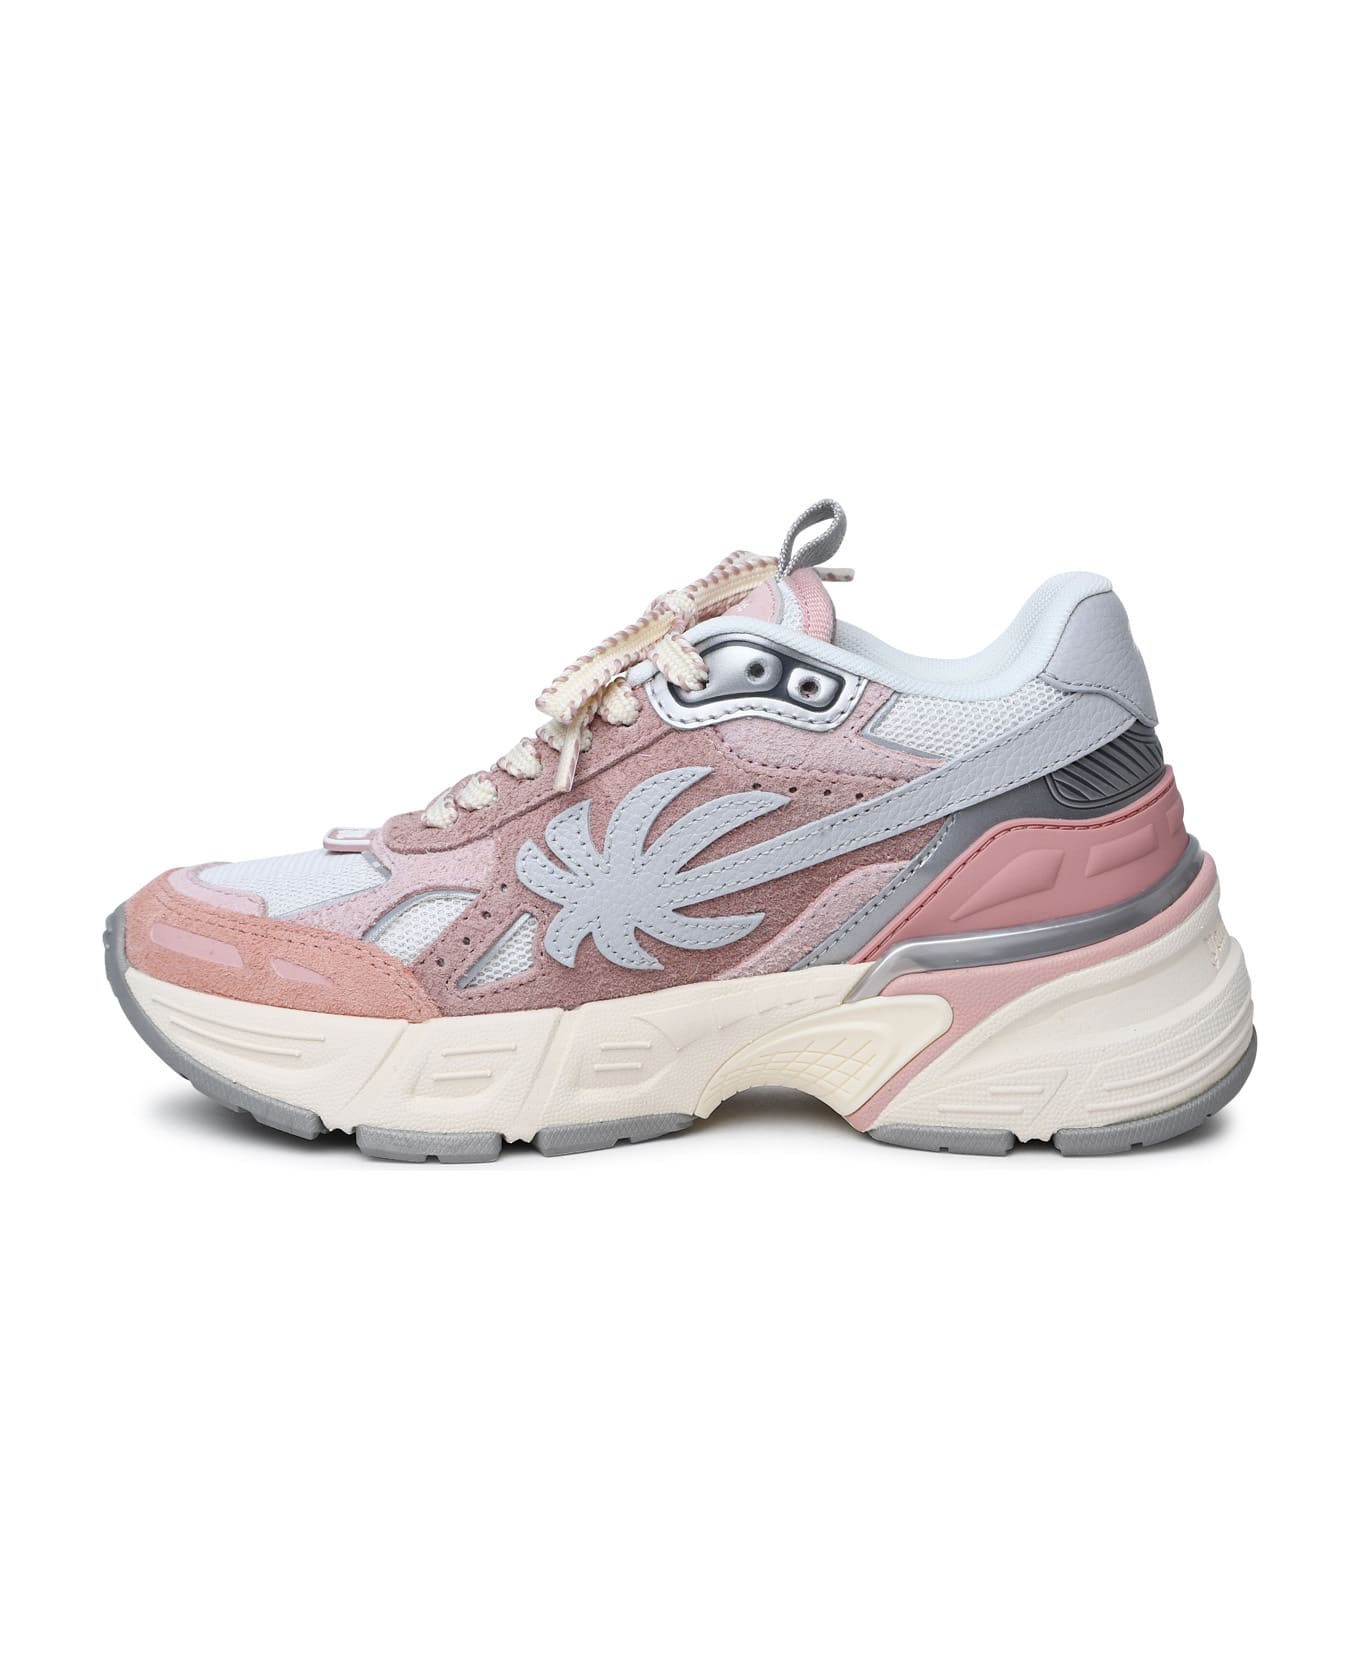 Palm Angels 'pa 4' Pink Leather Blend Sneakers - Pink